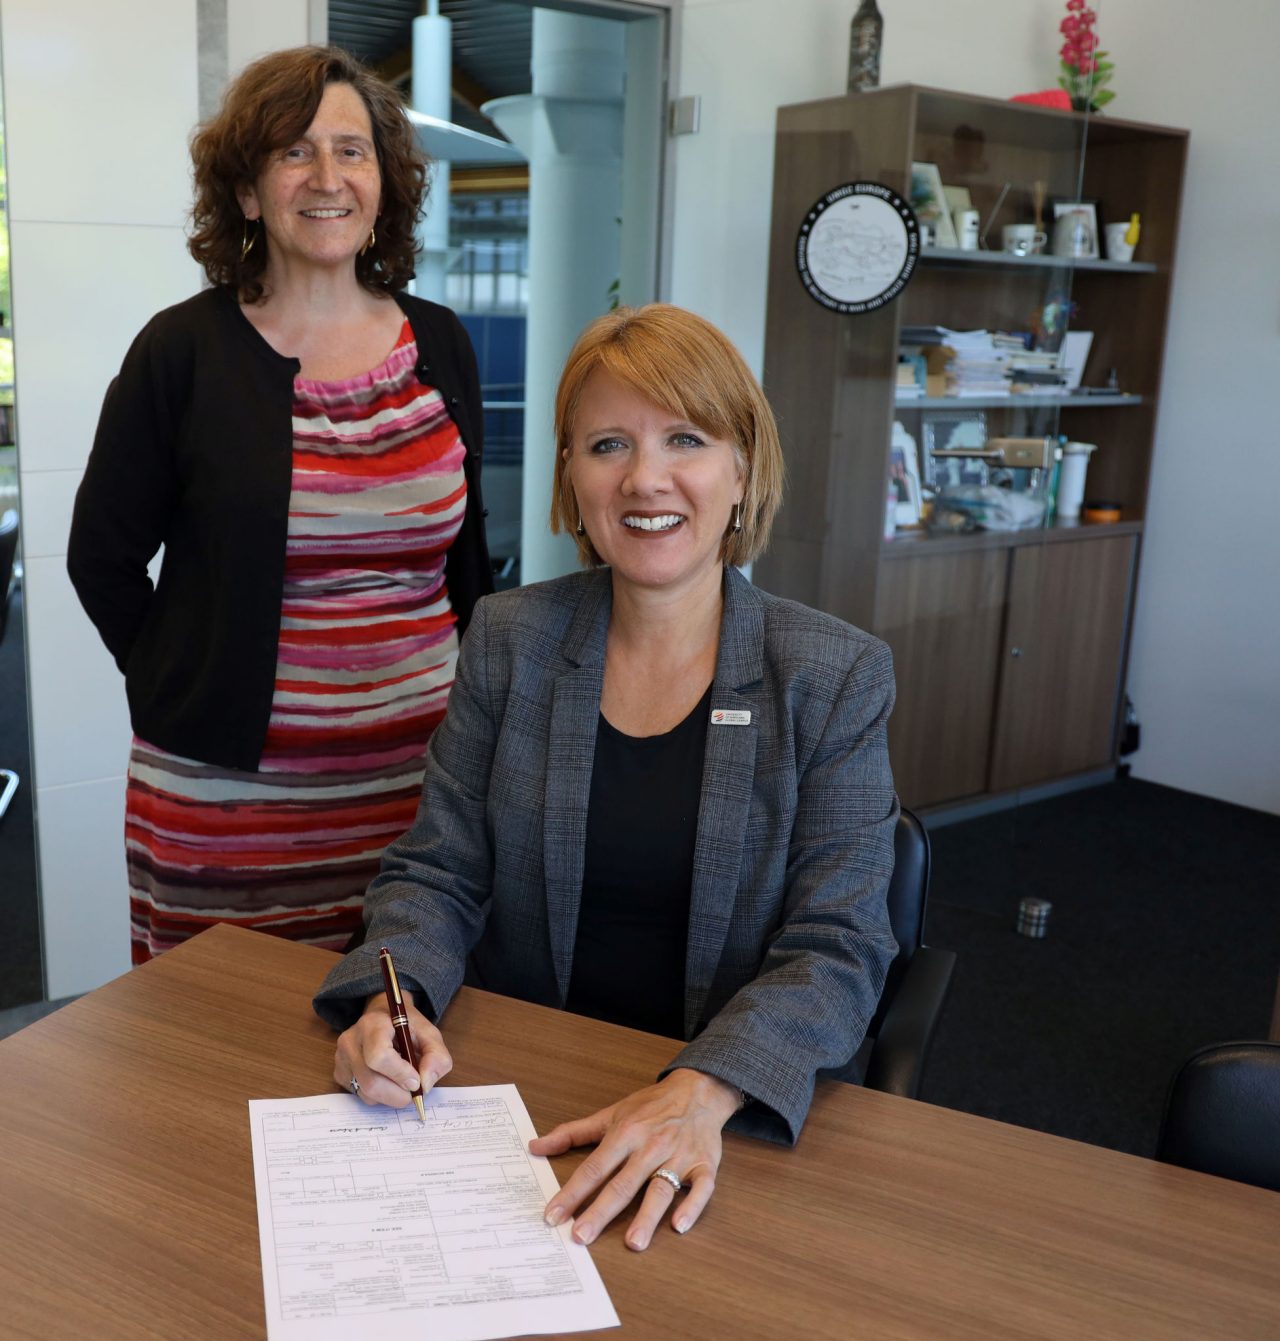 Patricia Coopersmith, vice president and director of UMGC’s Europe Division, signs the DoD contract, as Monika Denburg, director of Institutional Research and Contract Compliance in the Europe Division, looks on.